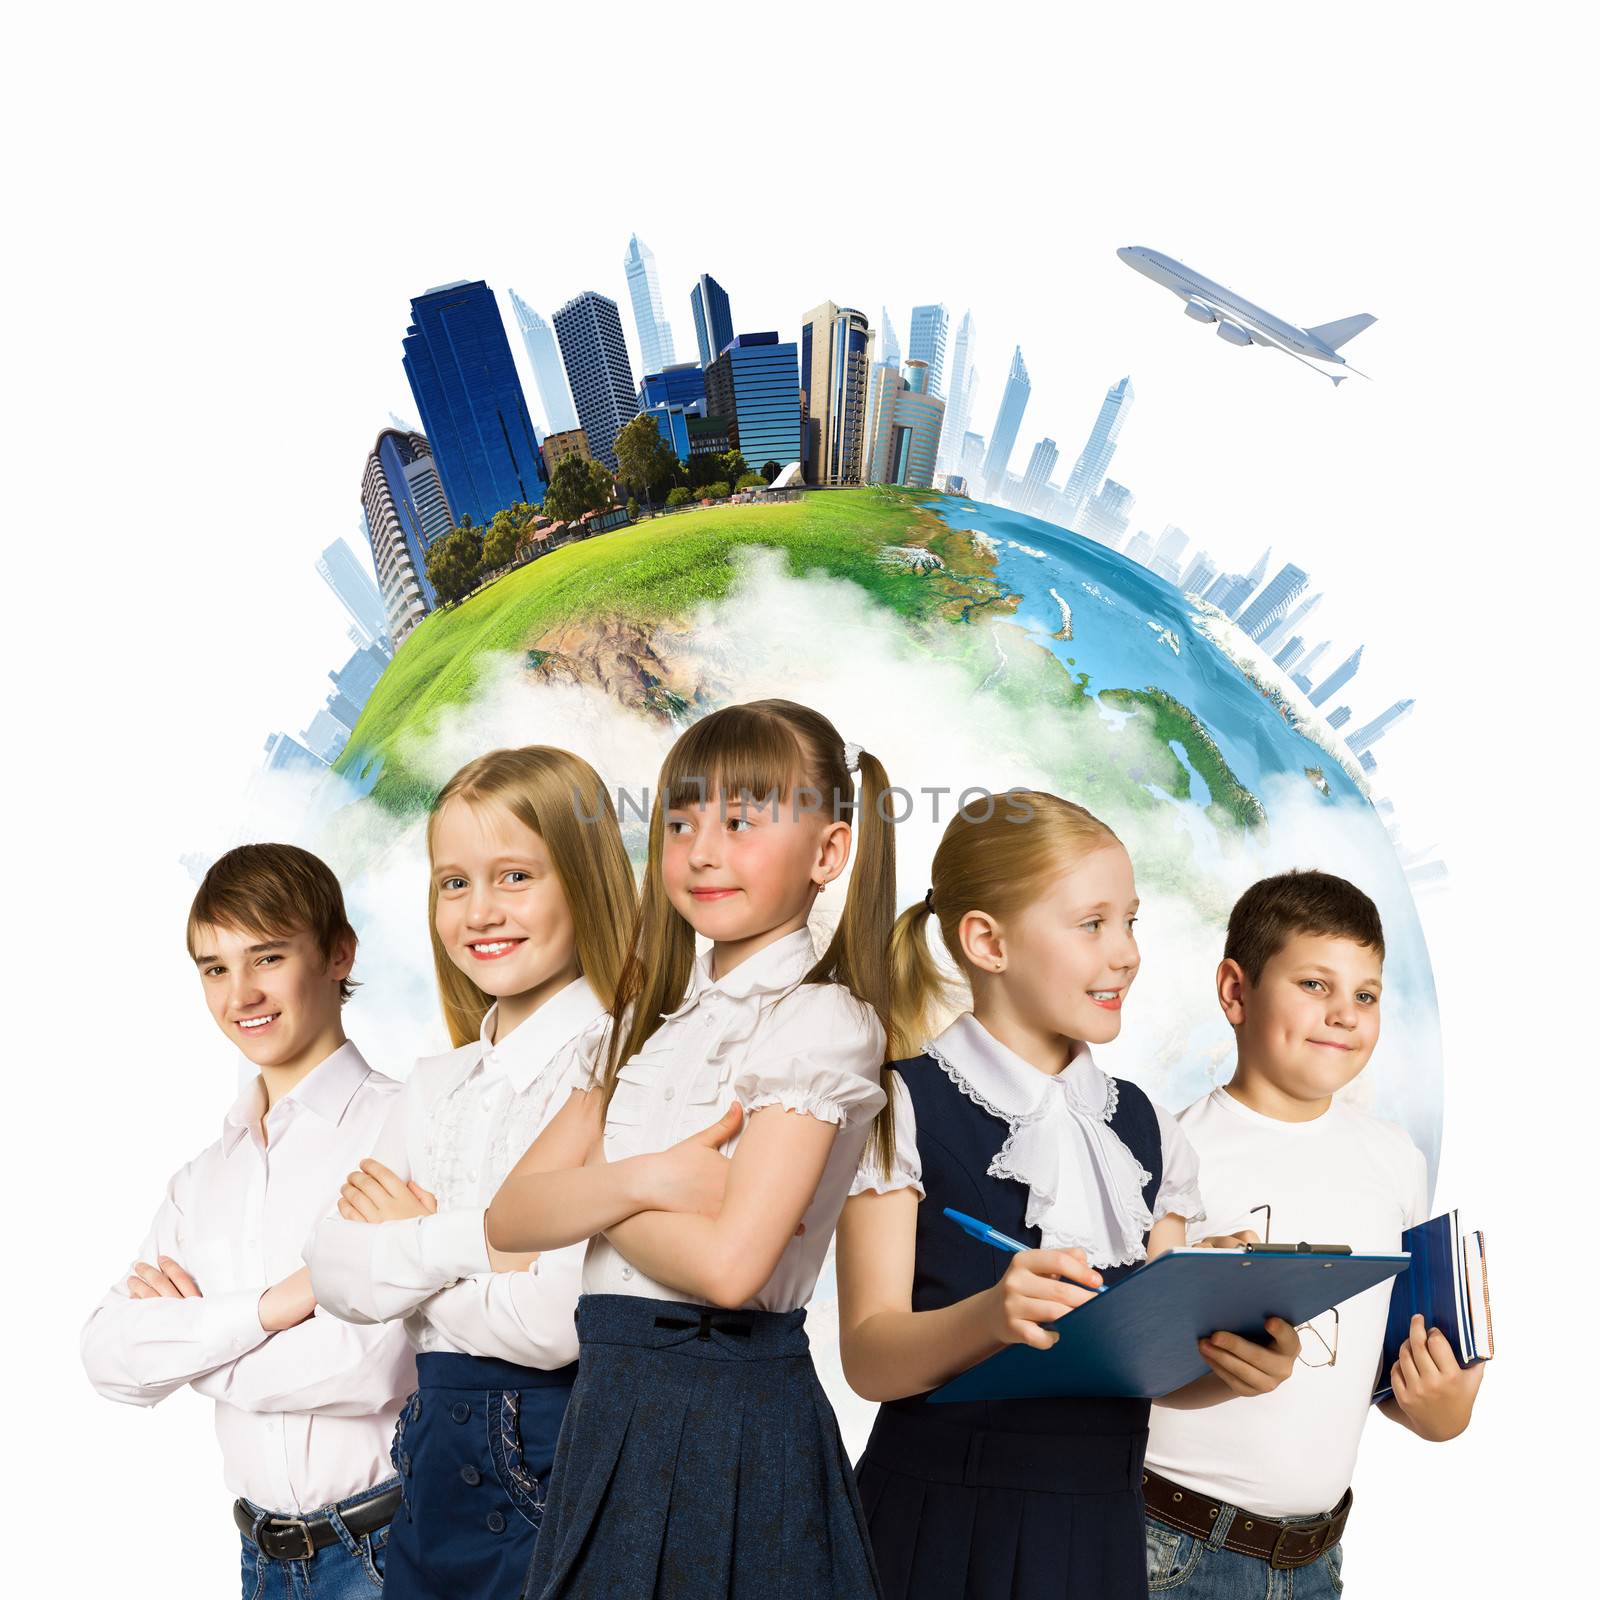 Image of kids of school age. Choosing profession. Elements of this image are furnished by NASA